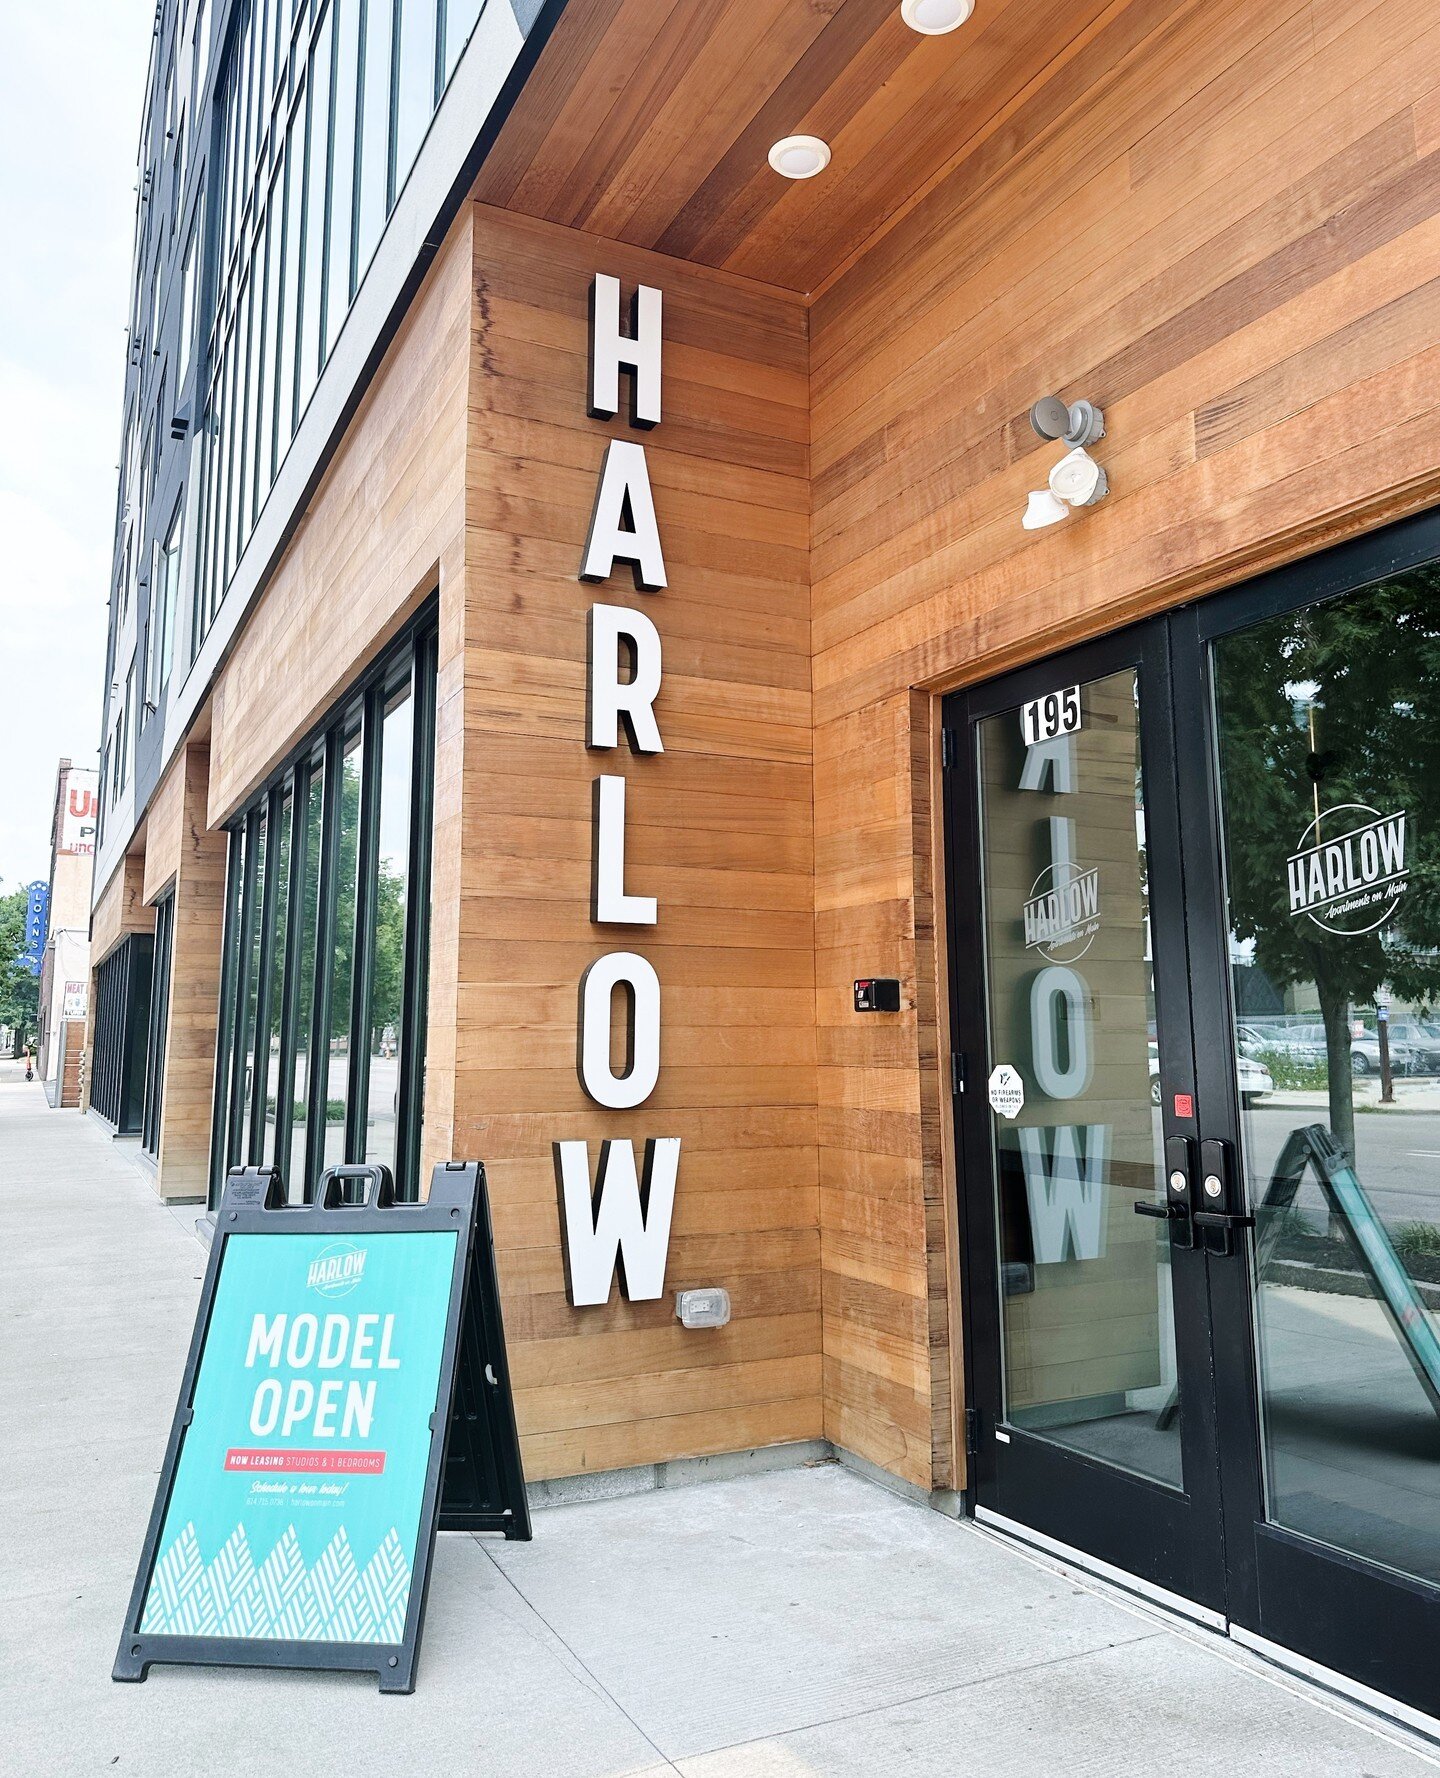 Our model room is open and ready for you to come visit! Come stop by during our office hours from 9:30am-5:00pm M-F or check out our website for more information! ⁠
⁠
.⁠
.⁠
.⁠
⁠
⁠
📞: 614-715-0738⁠
💻: www.harlowonmain.com